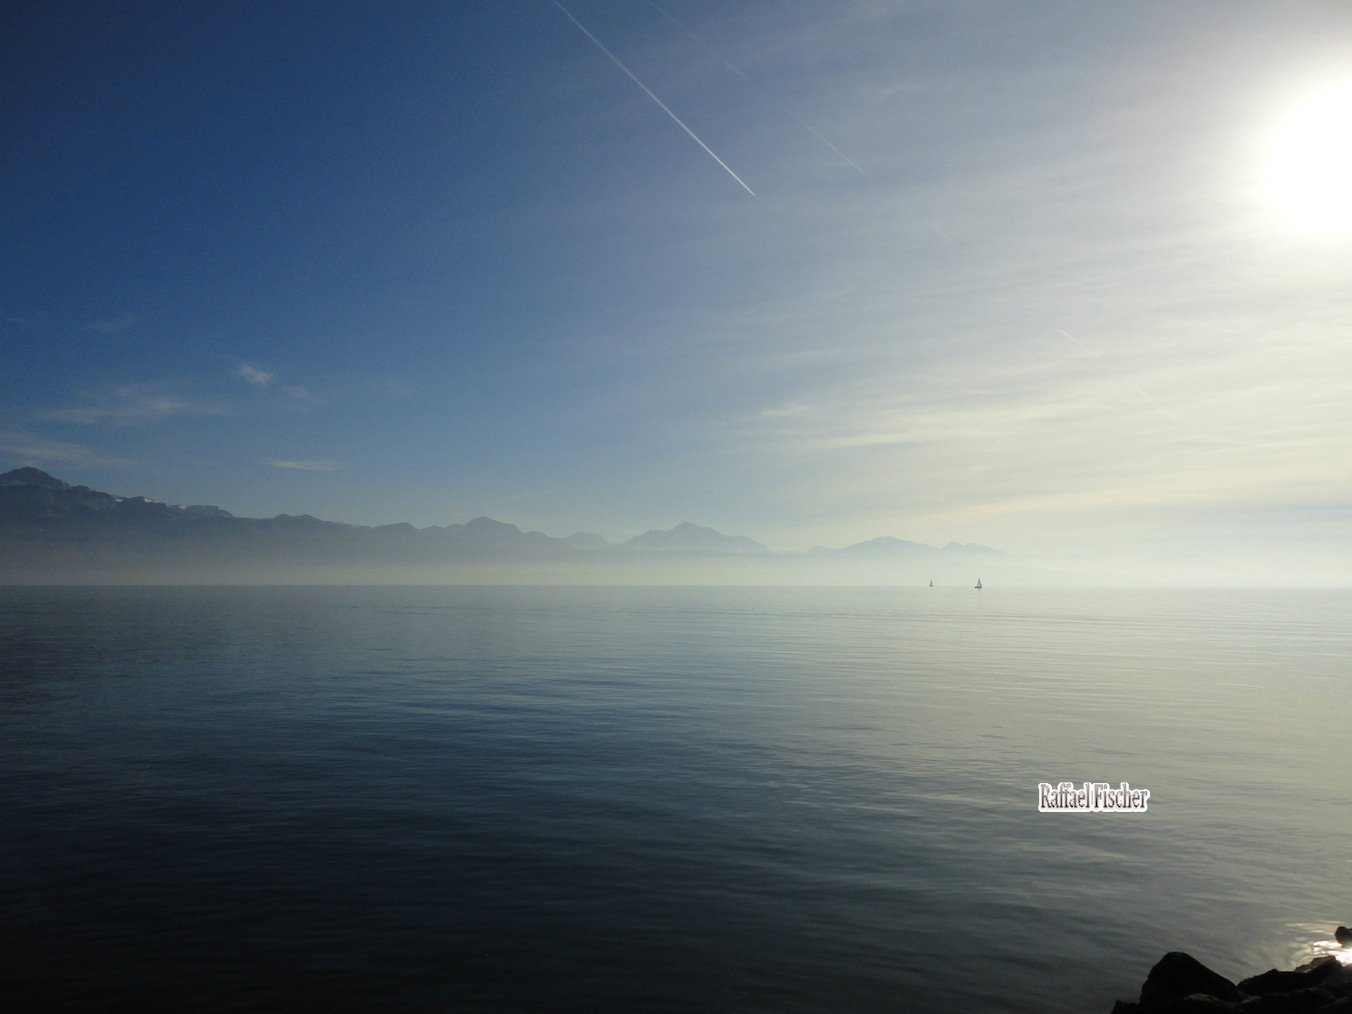 Lac Leman in Lausanne-Ouchy